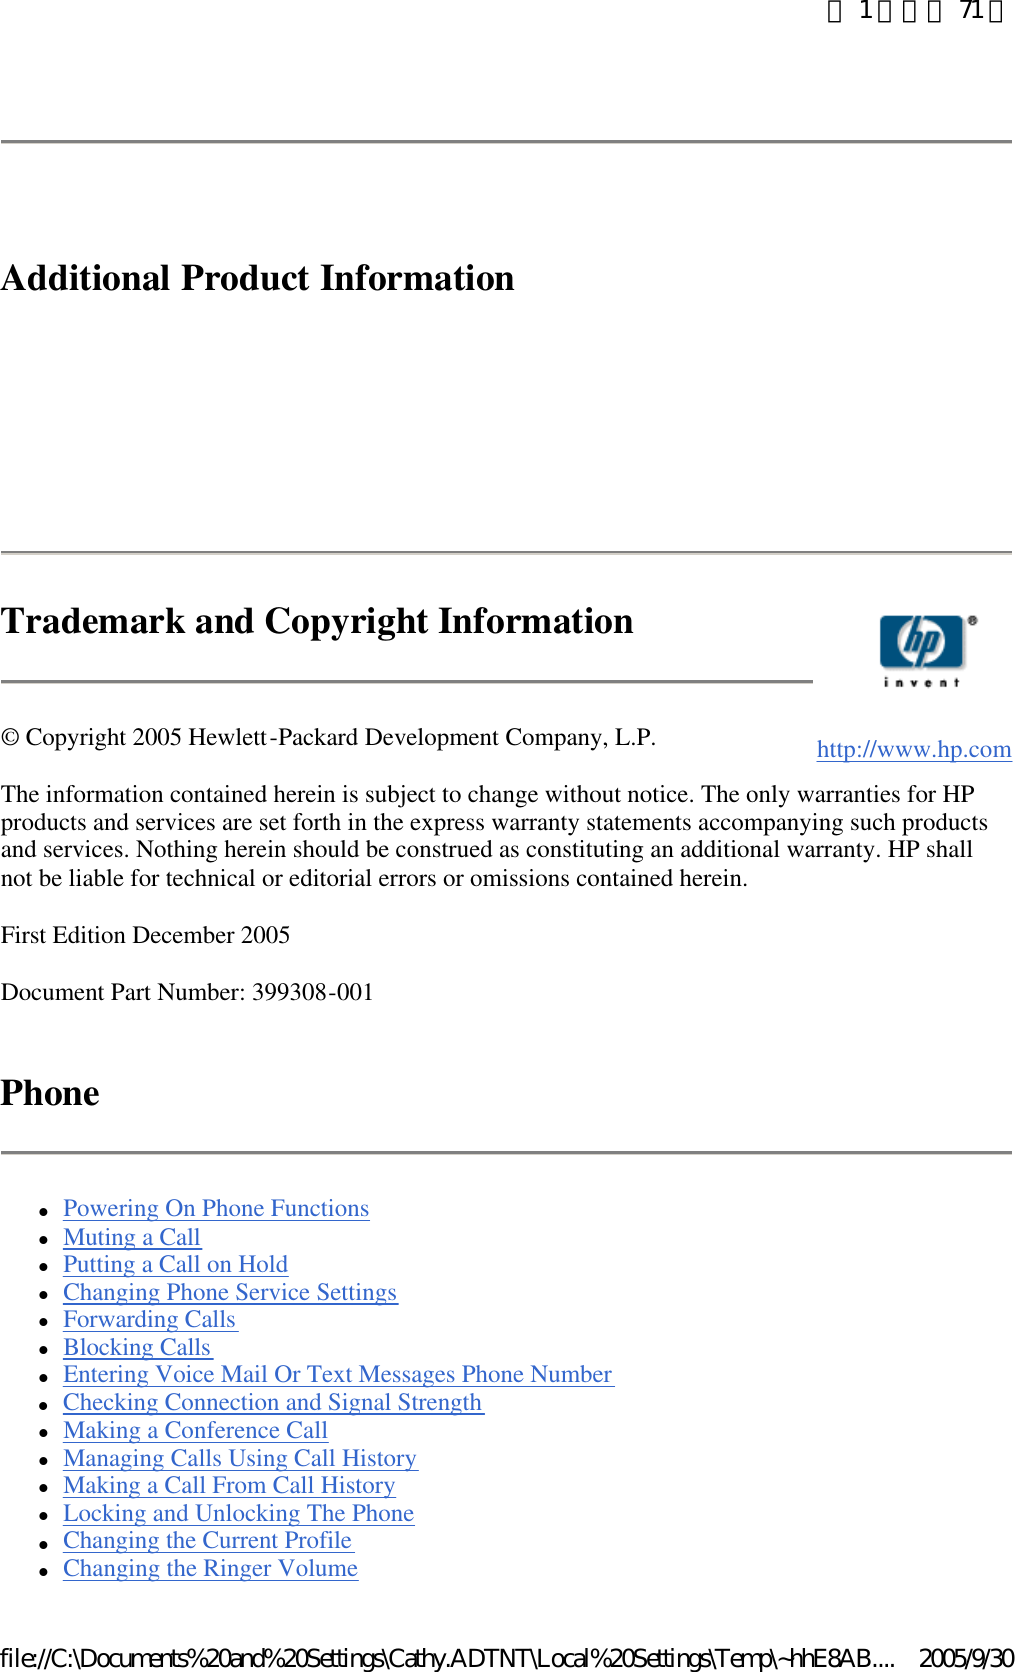   Additional Product Information        Trademark and Copyright Information © Copyright 2005 Hewlett-Packard Development Company, L.P.  The information contained herein is subject to change without notice. The only warranties for HP products and services are set forth in the express warranty statements accompanying such products and services. Nothing herein should be construed as constituting an additional warranty. HP shall not be liable for technical or editorial errors or omissions contained herein.  First Edition December 2005 Document Part Number: 399308-001 Phone lPowering On Phone Functions  lMuting a Call  lPutting a Call on Hold  lChanging Phone Service Settings  lForwarding Calls  lBlocking Calls  lEntering Voice Mail Or Text Messages Phone Number  lChecking Connection and Signal Strength  lMaking a Conference Call  lManaging Calls Using Call History  lMaking a Call From Call History  lLocking and Unlocking The Phone  lChanging the Current Profile  lChanging the Ringer Volume     http://www.hp.com第 1 頁，共 71 頁2005/9/30file://C:\Documents%20and%20Settings\Cathy.ADTNT\Local%20Settings\Temp\~hhE8AB....